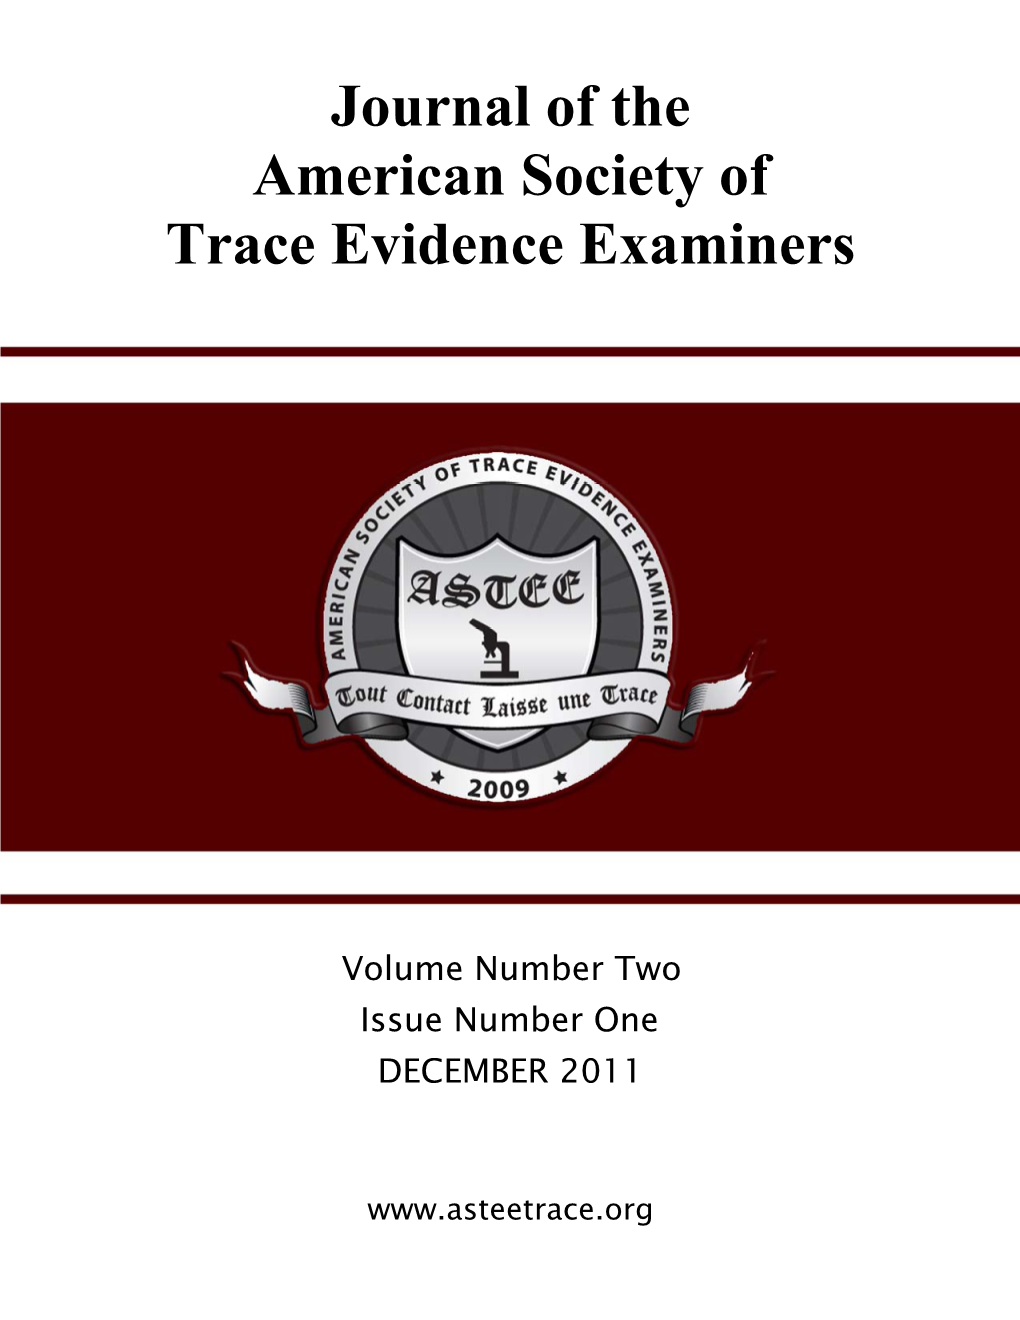 Journal of the American Society of Trace Evidence Examiners